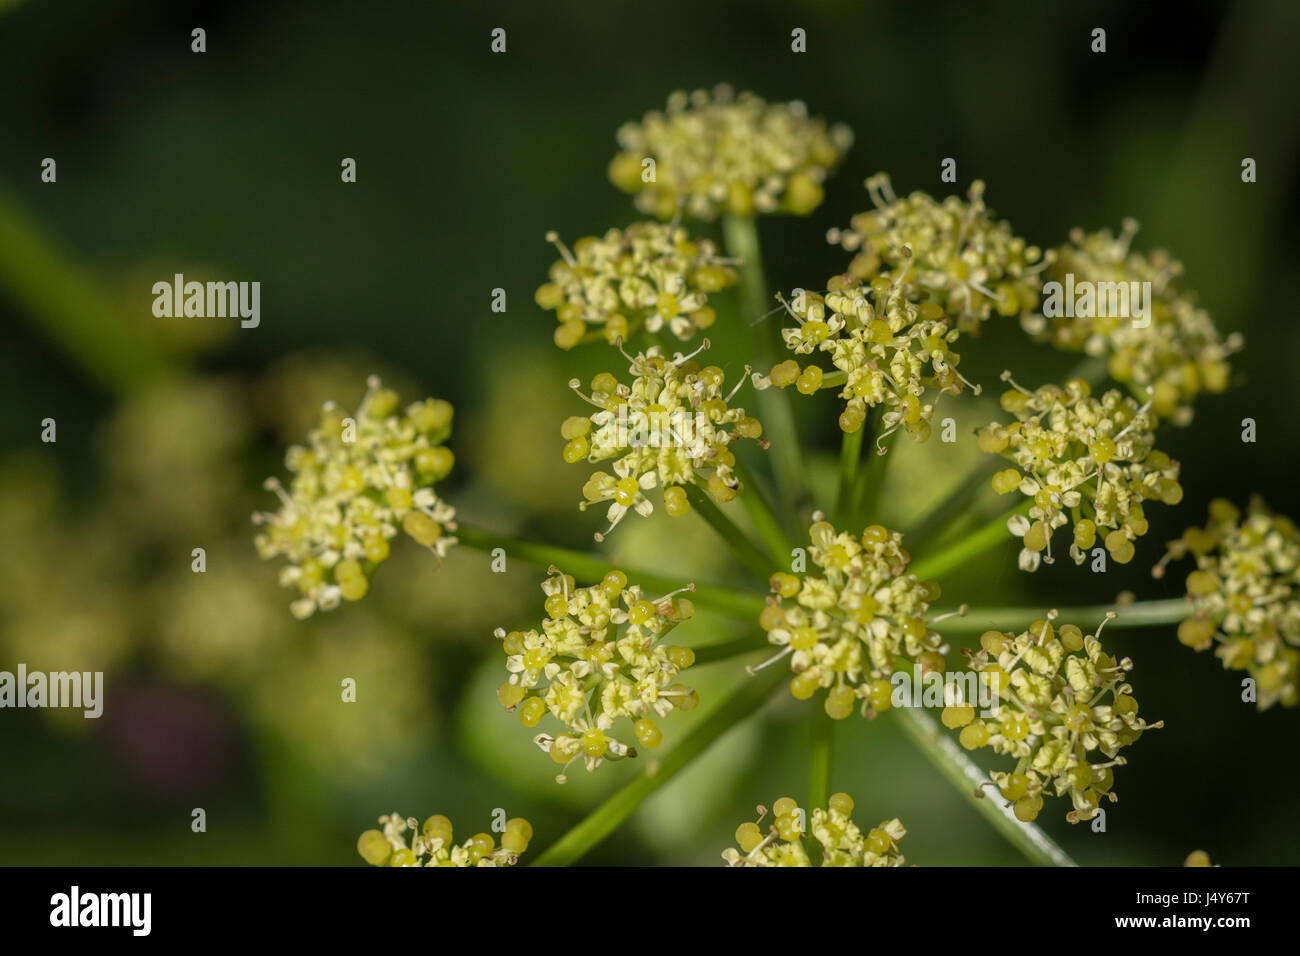 Flowers and flowerbuds of the Umbelliferous plant Alexanders / Smyrnium olusatrum - an edible foraged food, formerly cultivated as a vegetable. Stock Photo